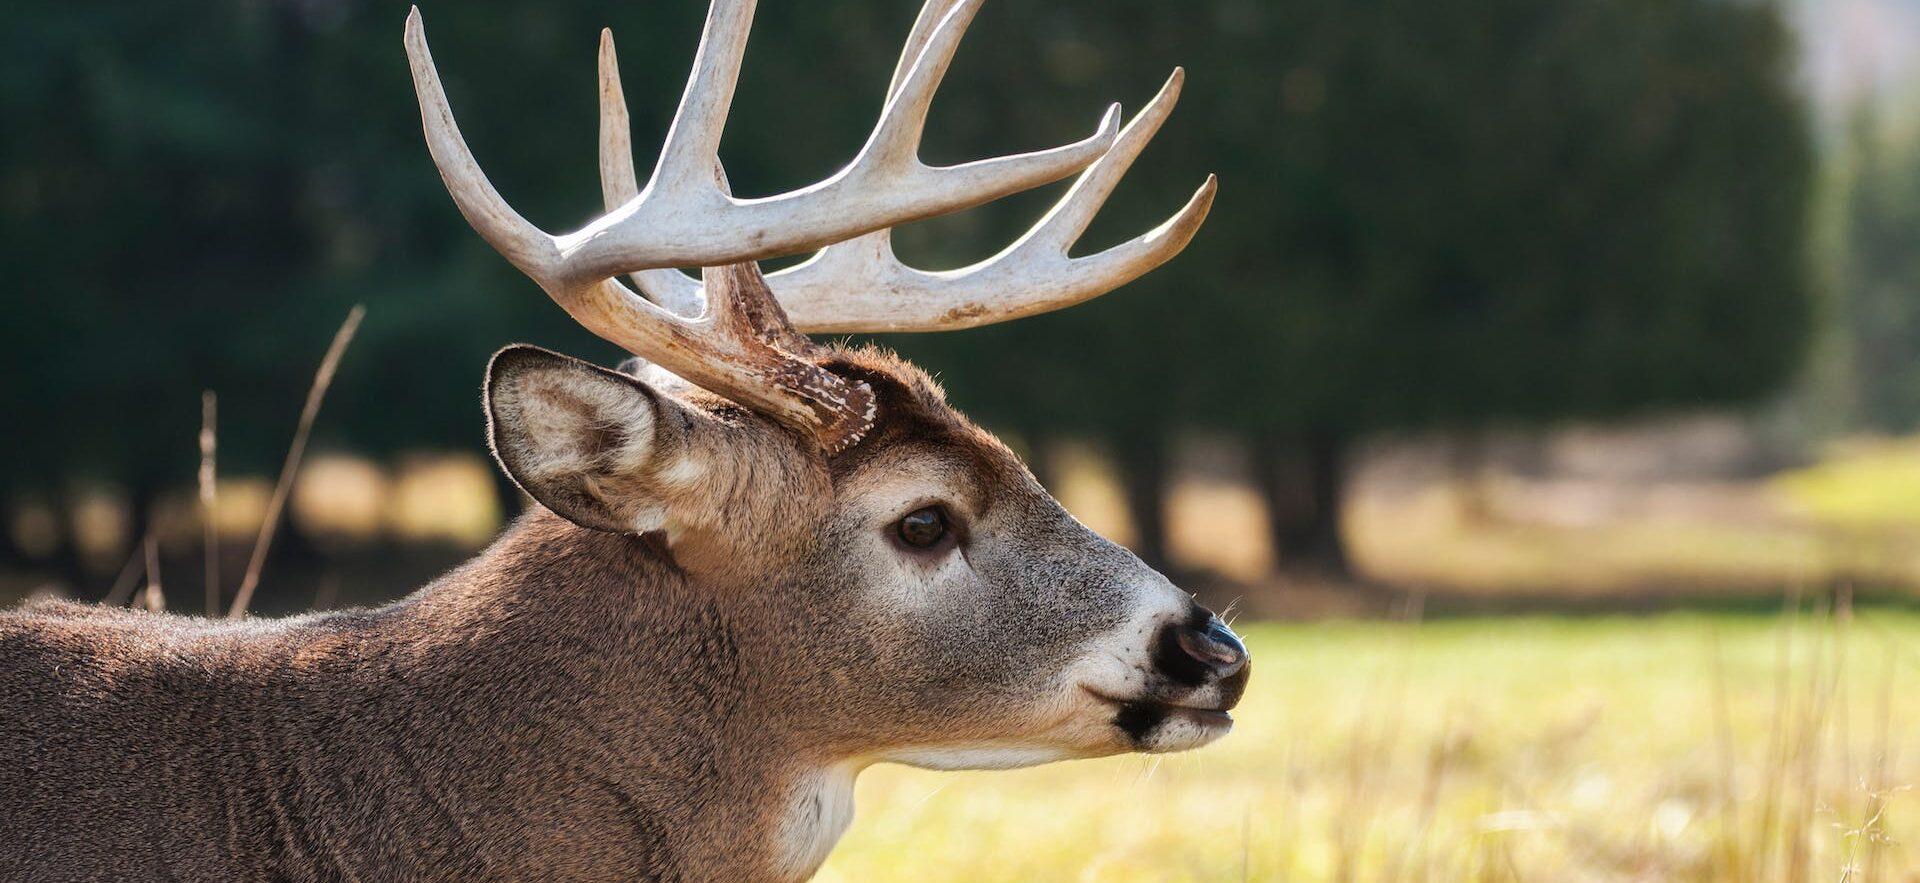 Yellowstone National Park Witness First Rare 'Zombie Disease' In Mule Deer